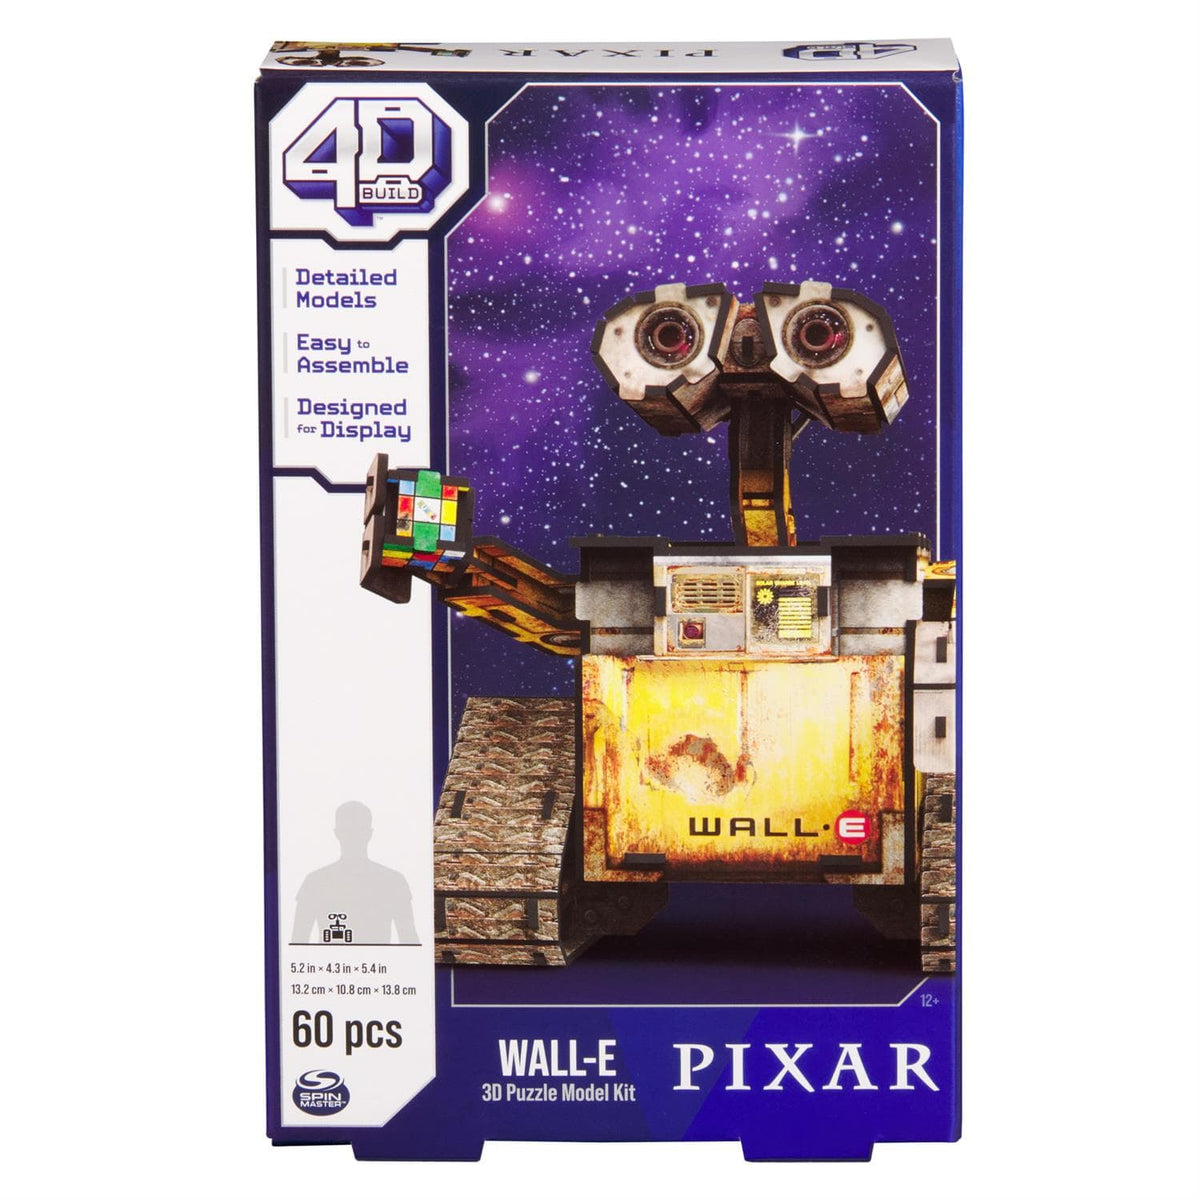 4D Build: Disney Pixar - Wall-E 3D Puzzle Model Kit with Stand